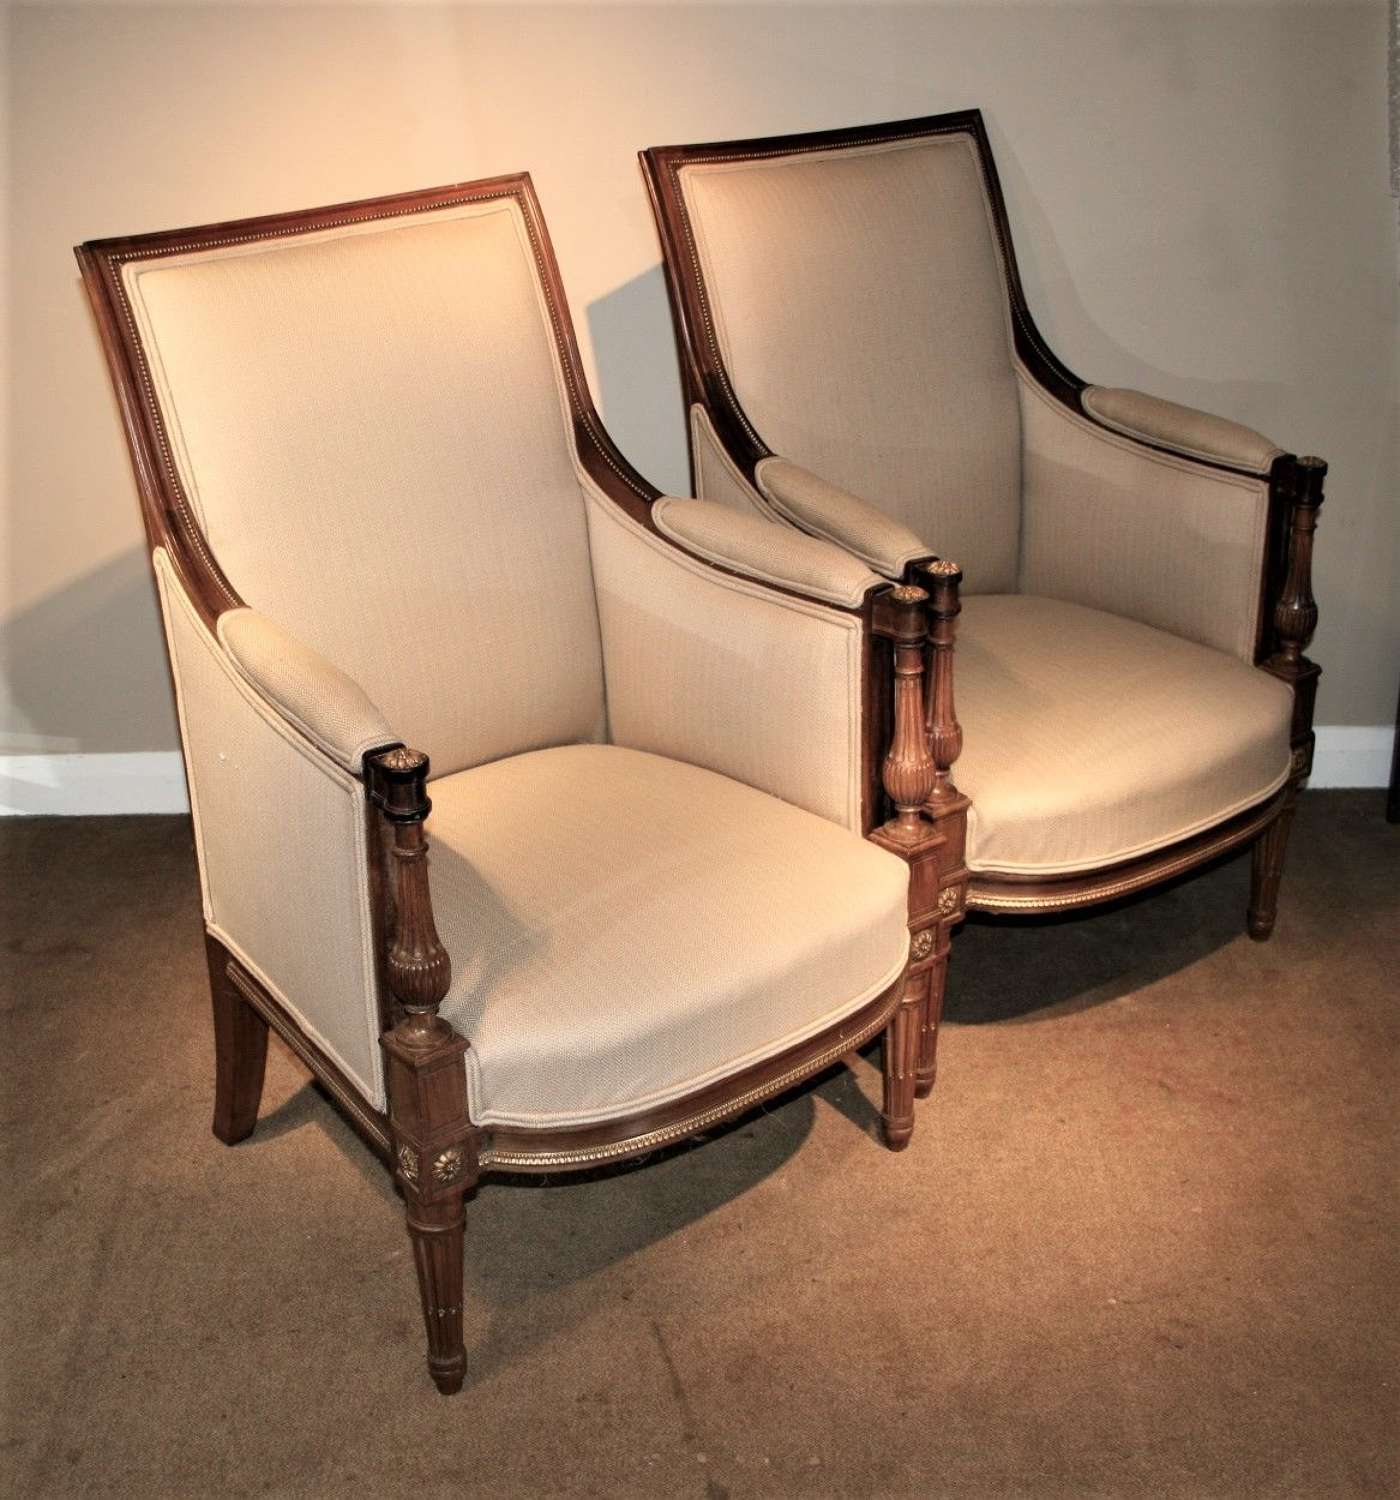 Pair of Empire style mahogany arm chairs